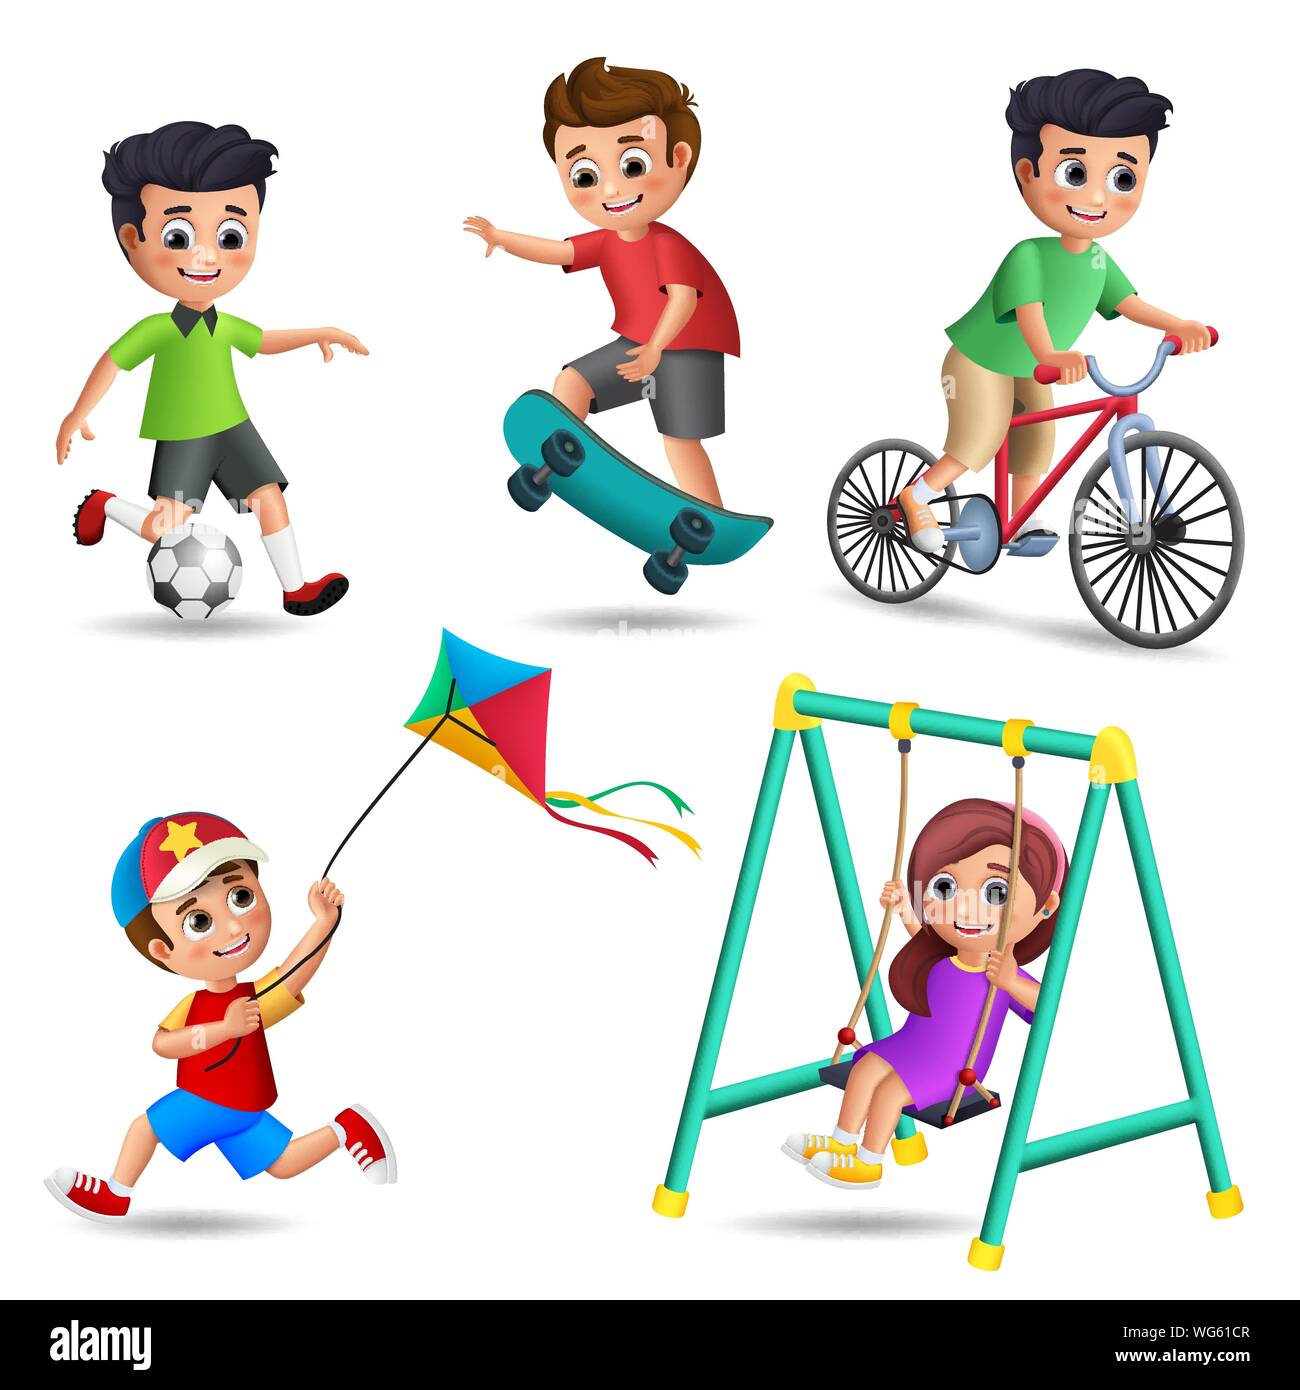 students playing sports clipart cartoon